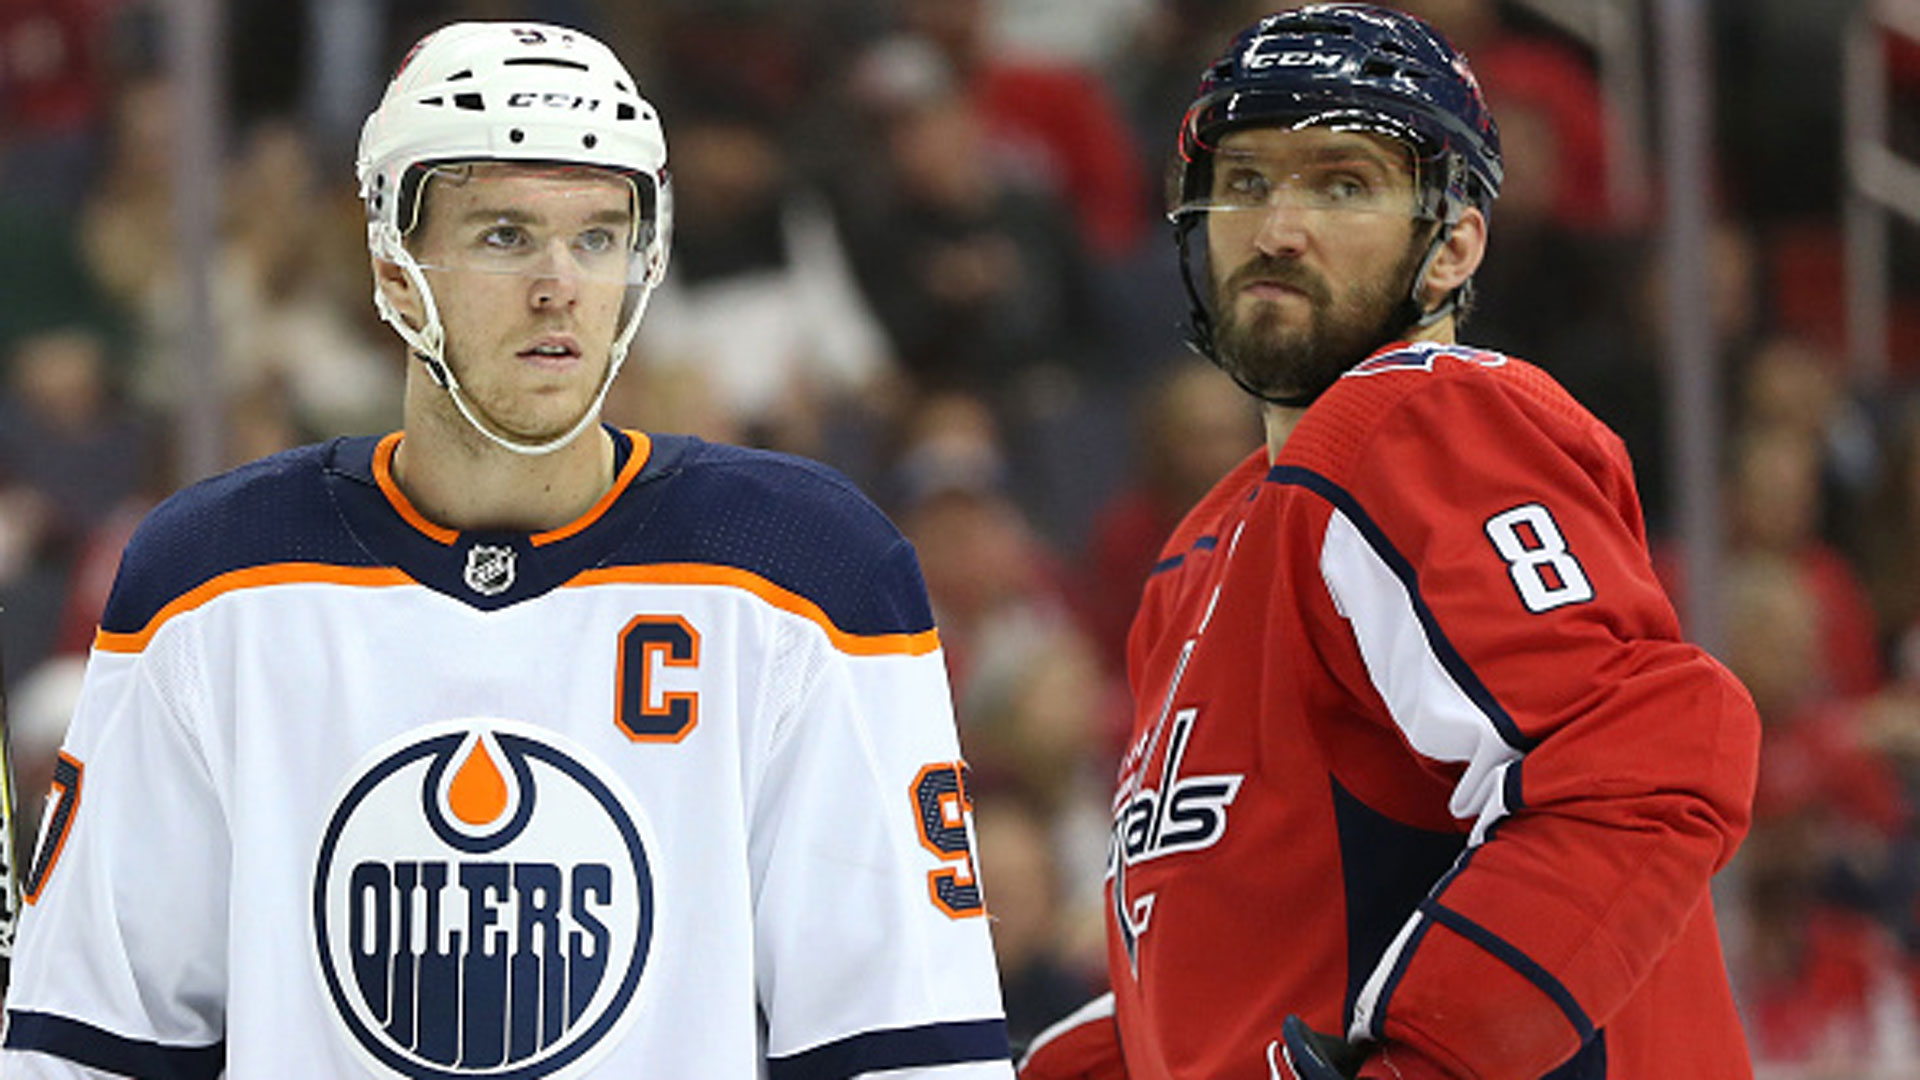 'He's still such a force': Oilers excited to face Ovechkin